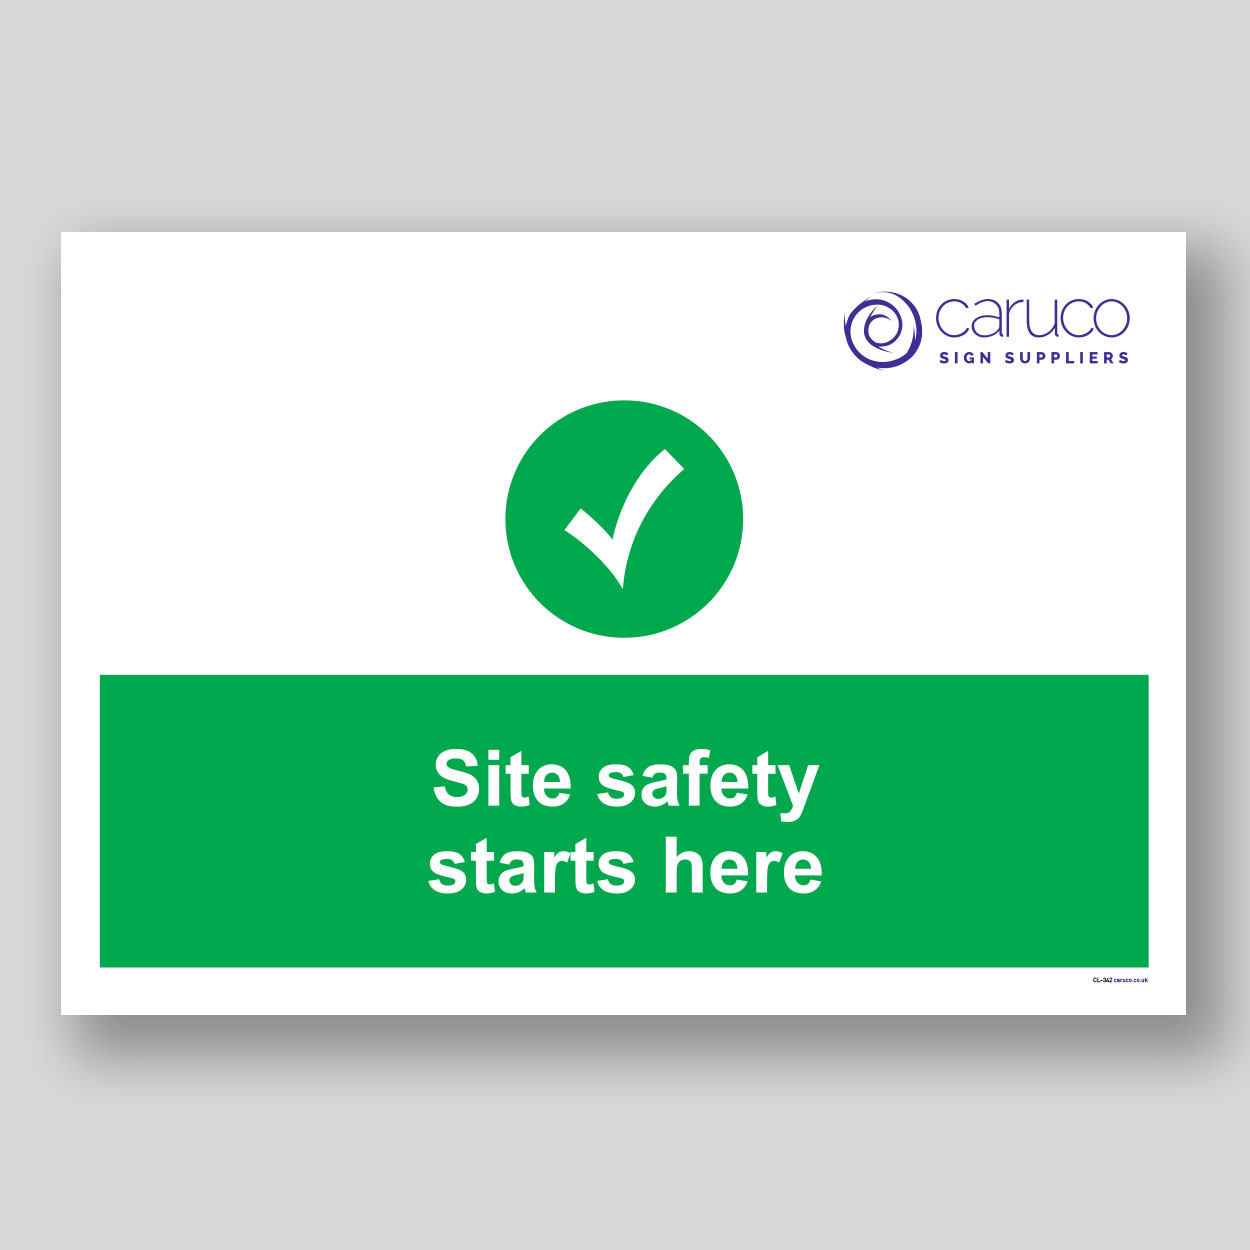 CL-342 Site safety starts here